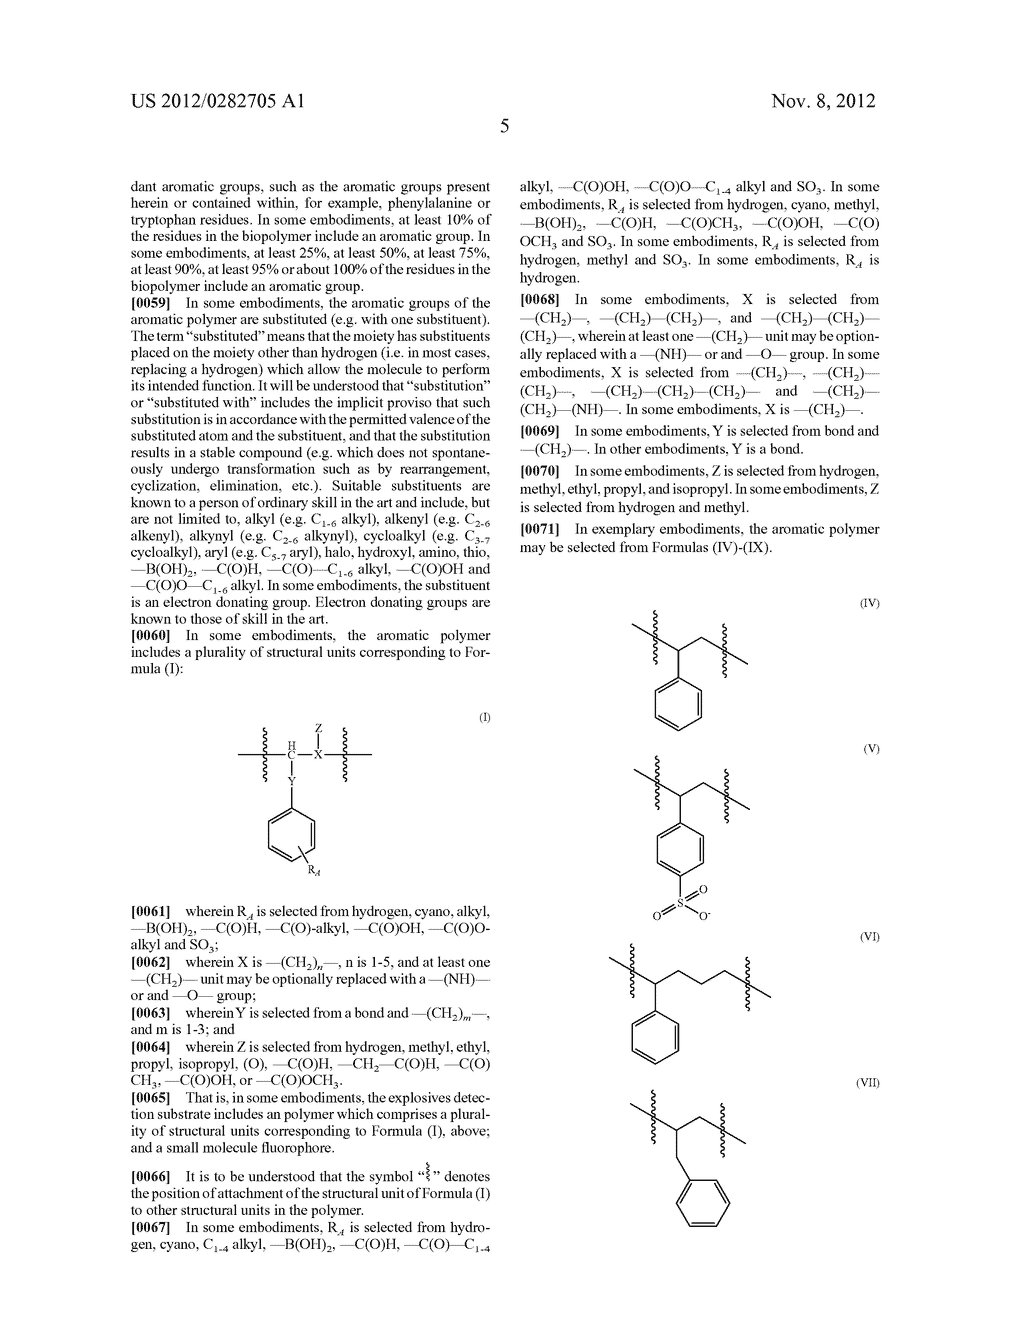 Explosives Detection Substrate and Methods of Using the Same - diagram, schematic, and image 31